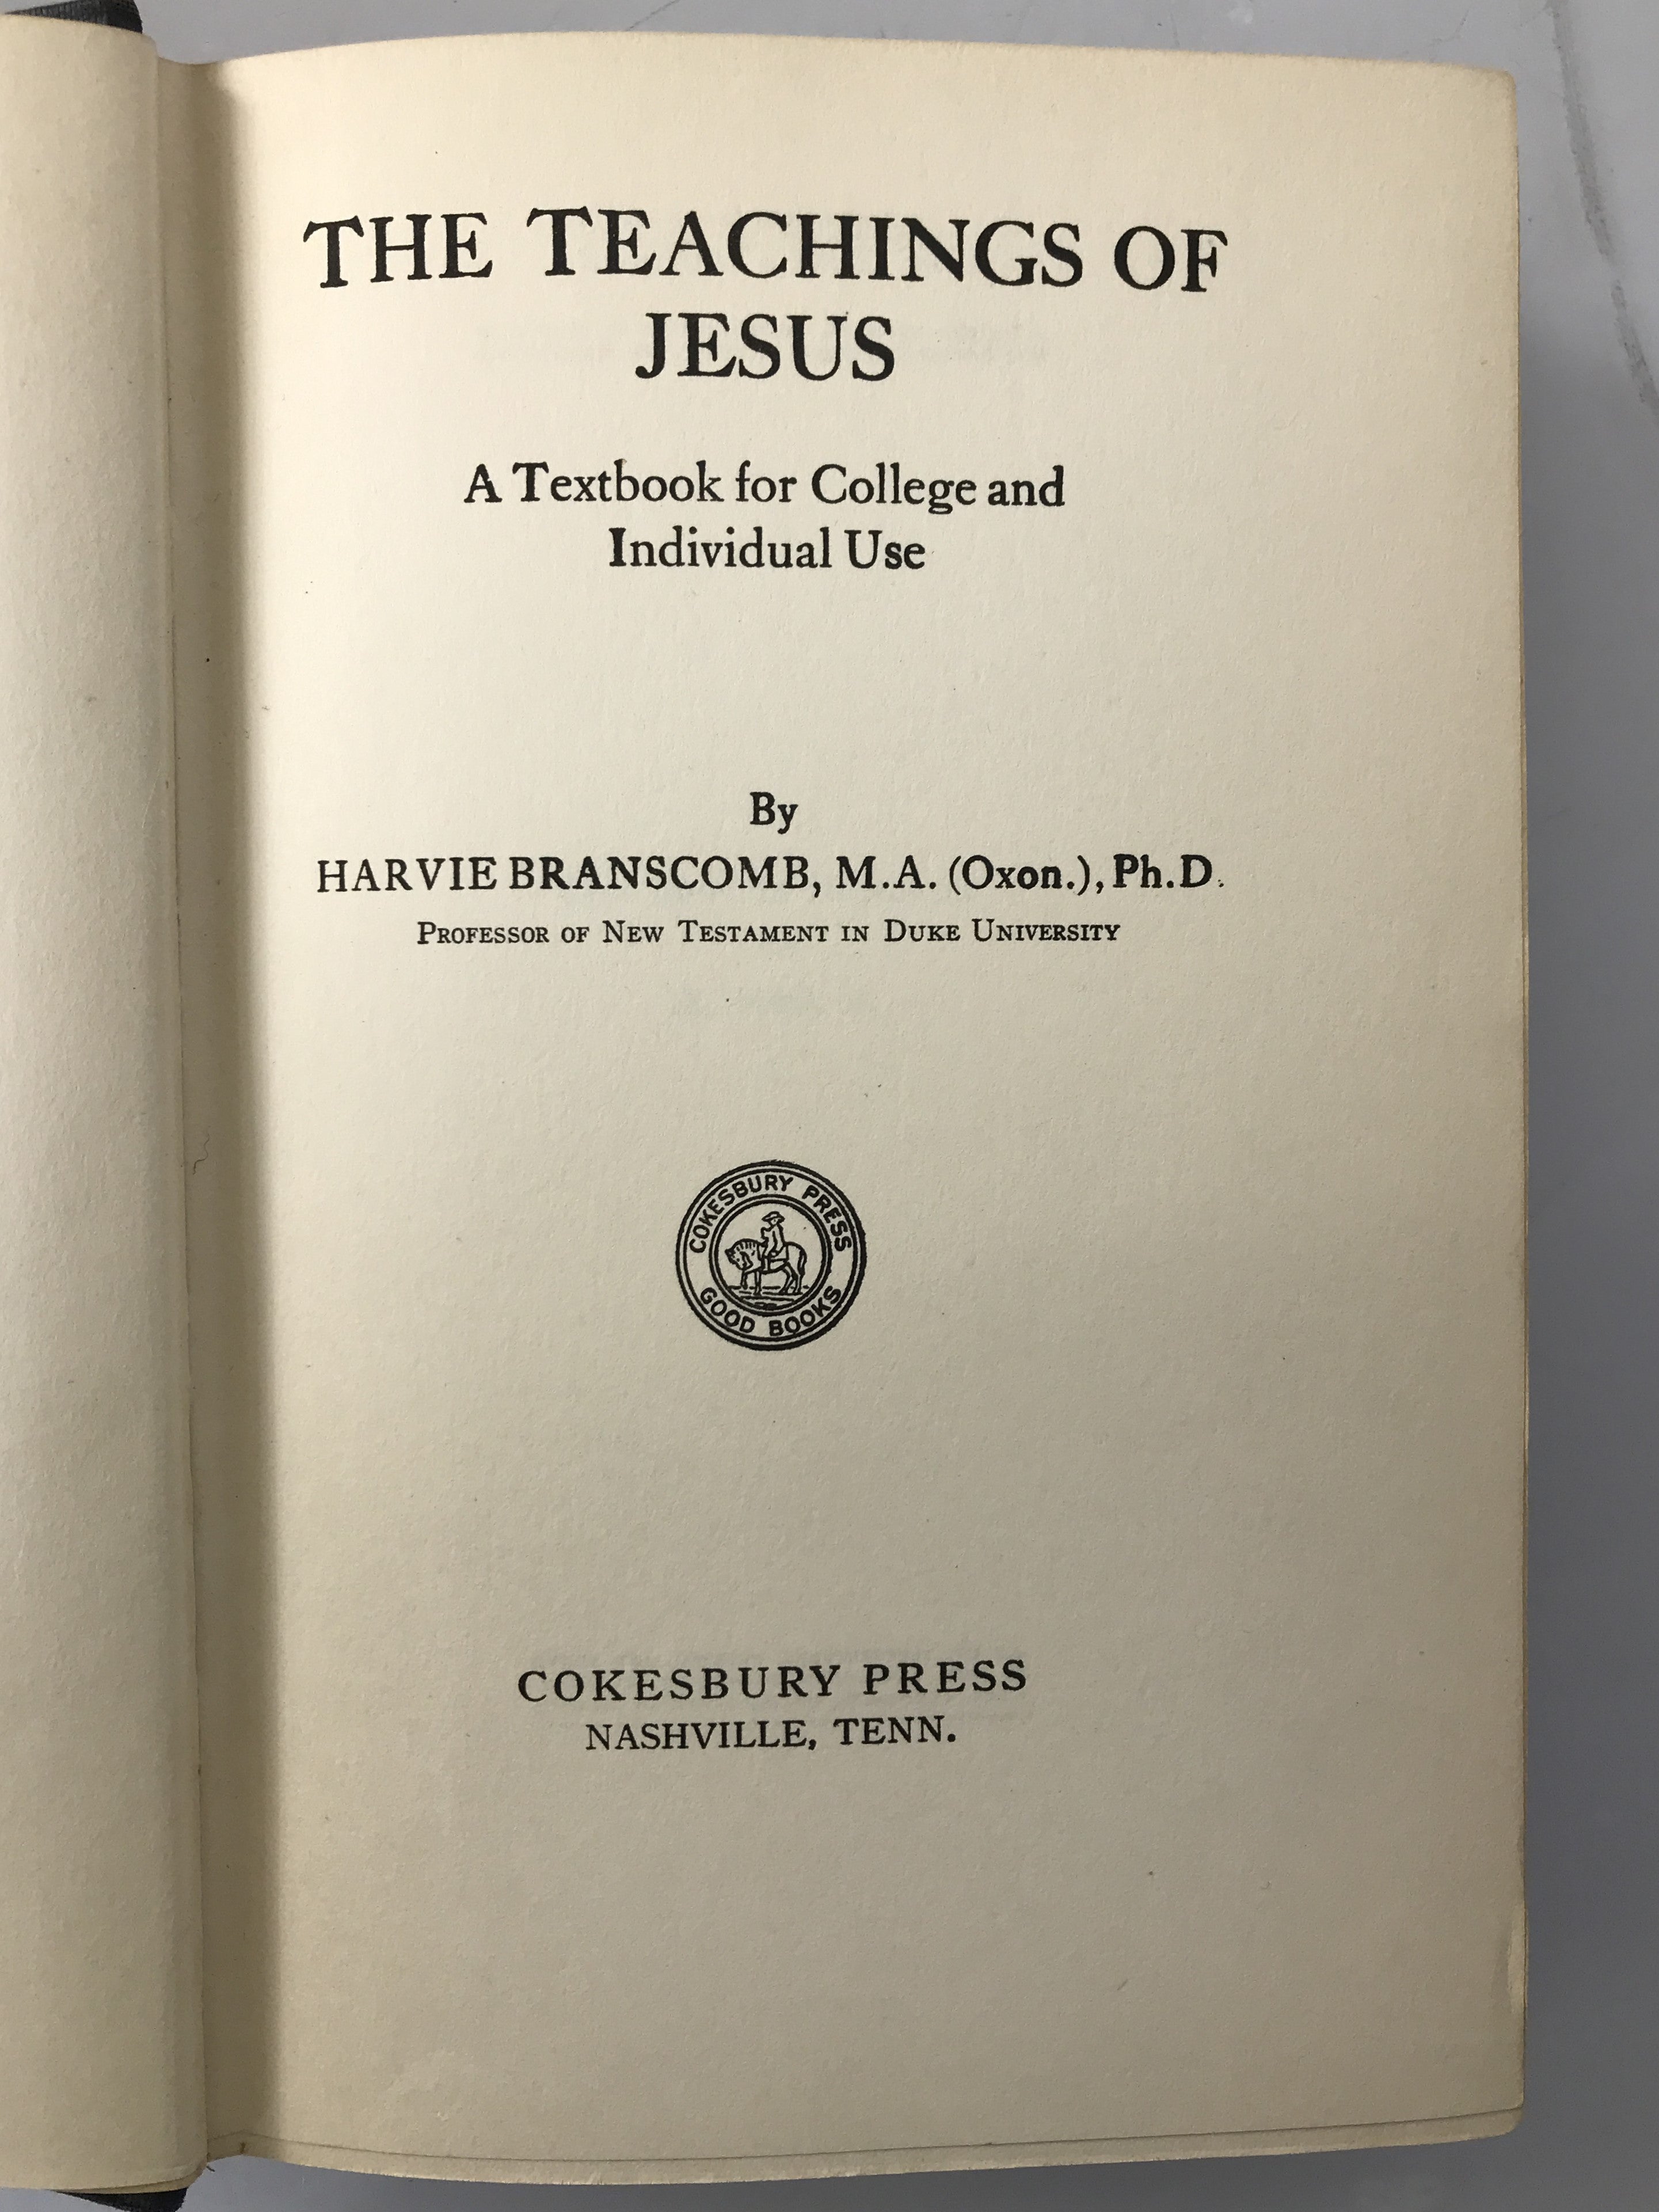 The Teachings of Jesus A Textbook for College and Individual Use by Harvie Branscomb 1931 HC